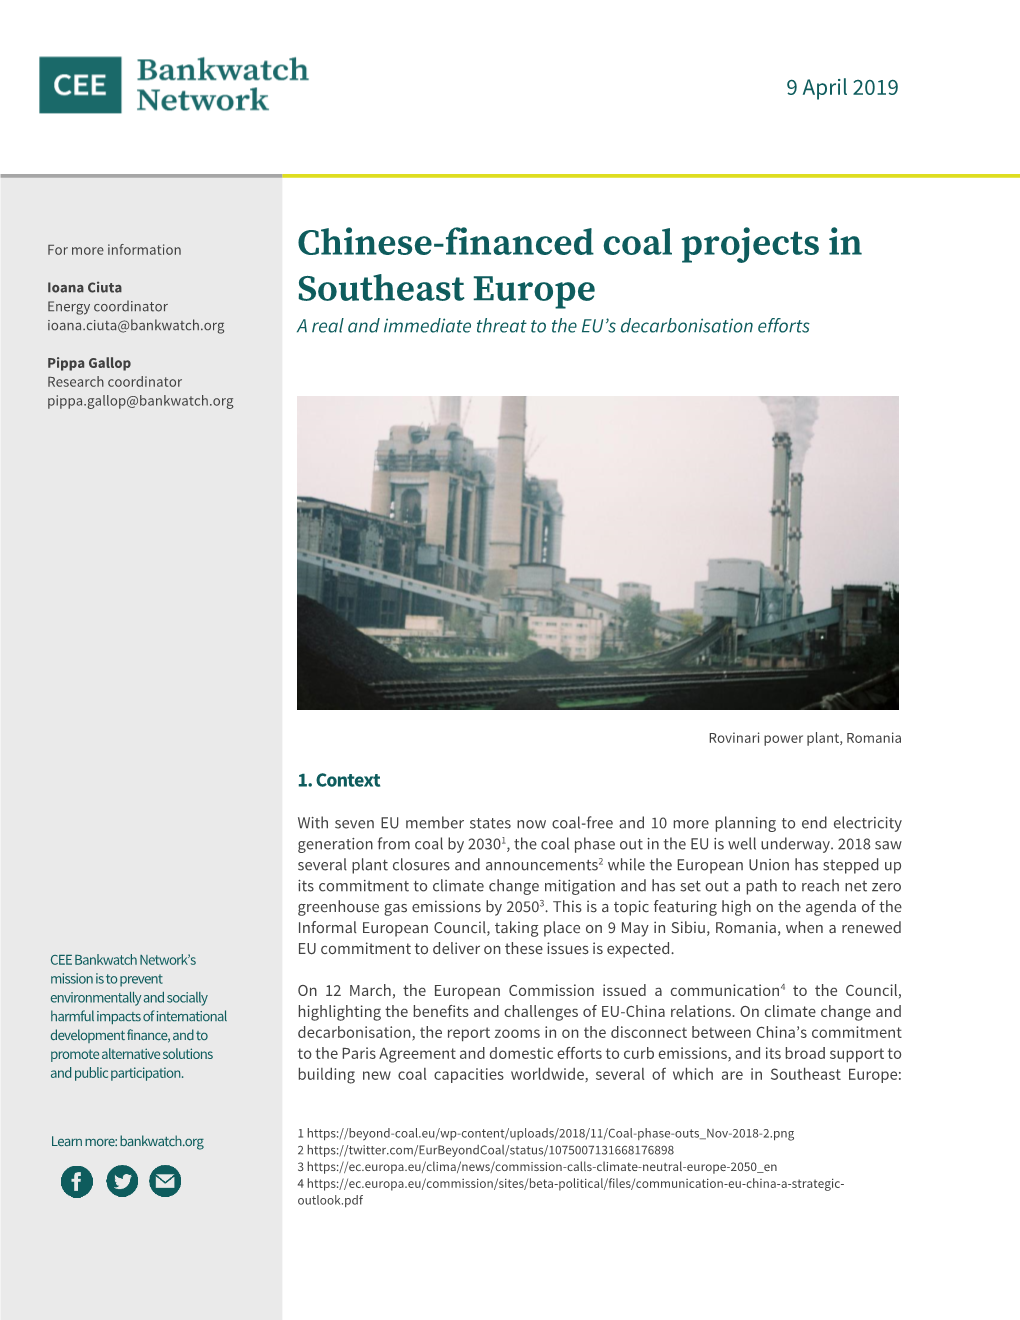 Chinese-Financed Coal Projects in Southeast Europe